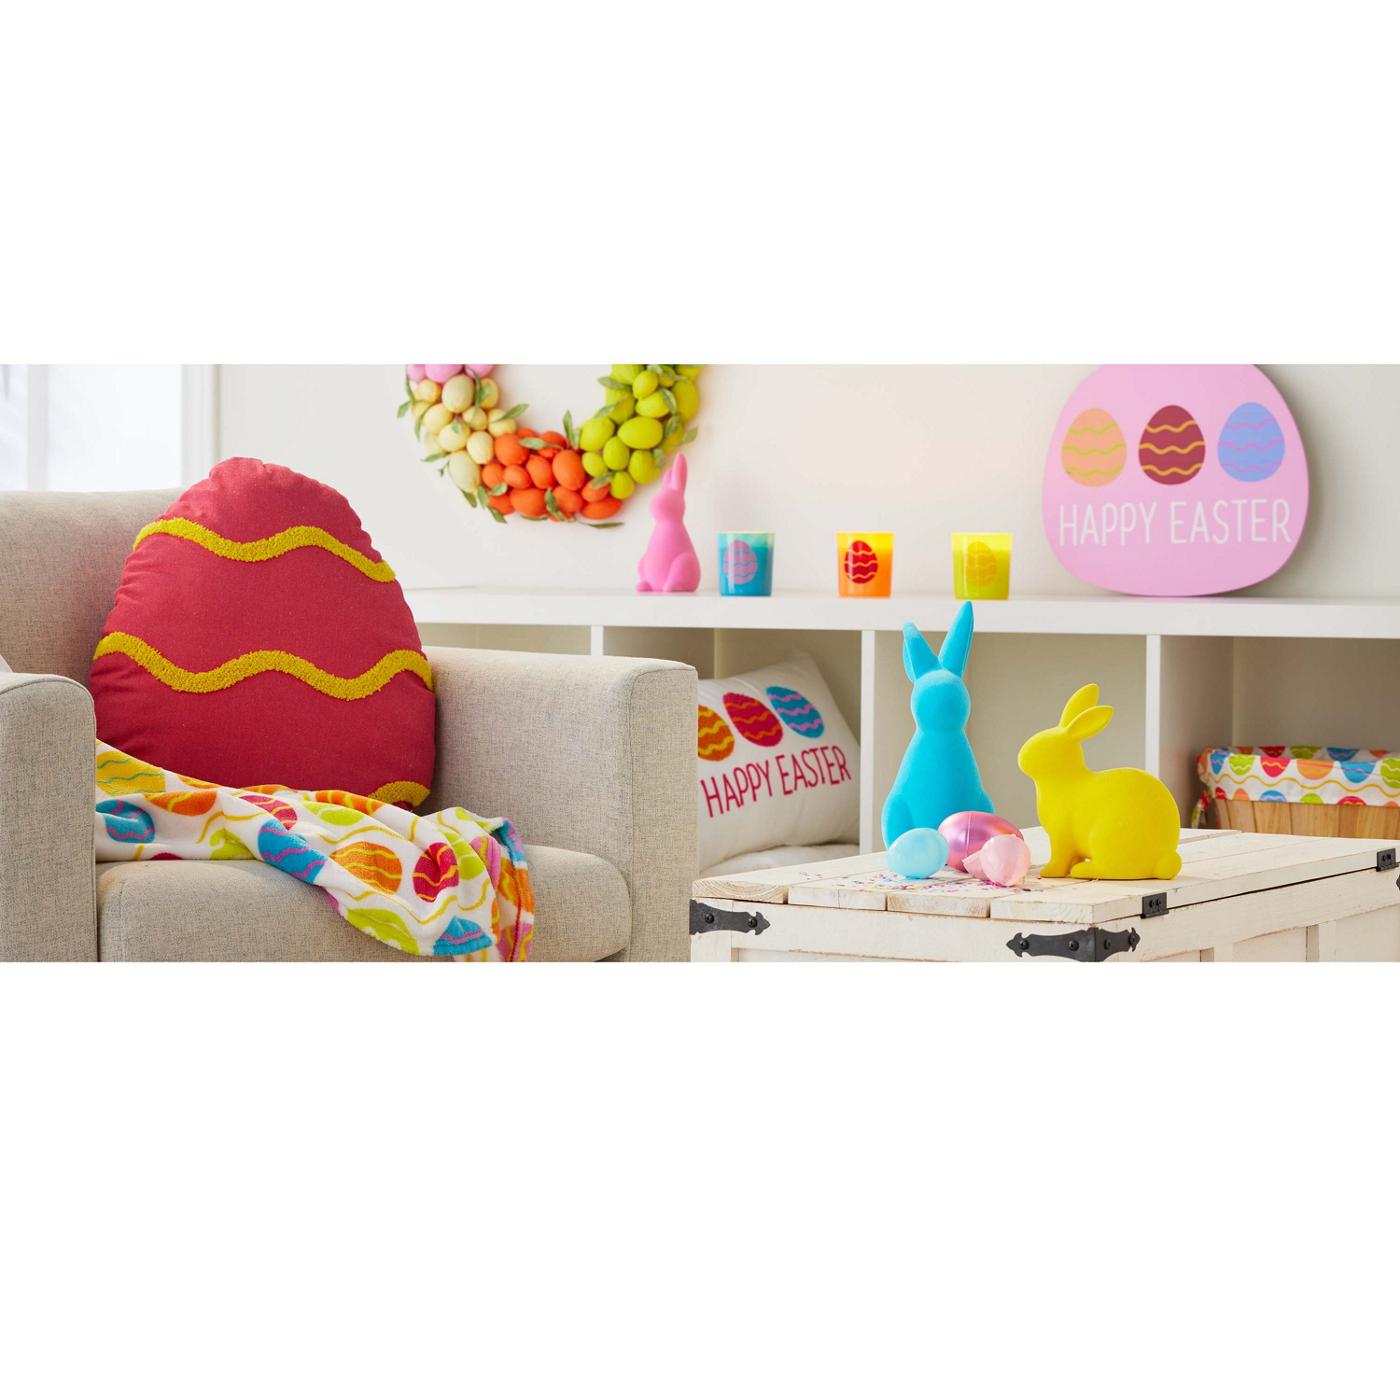 Destination Holiday Flocked Easter Bunny - Yellow; image 2 of 2